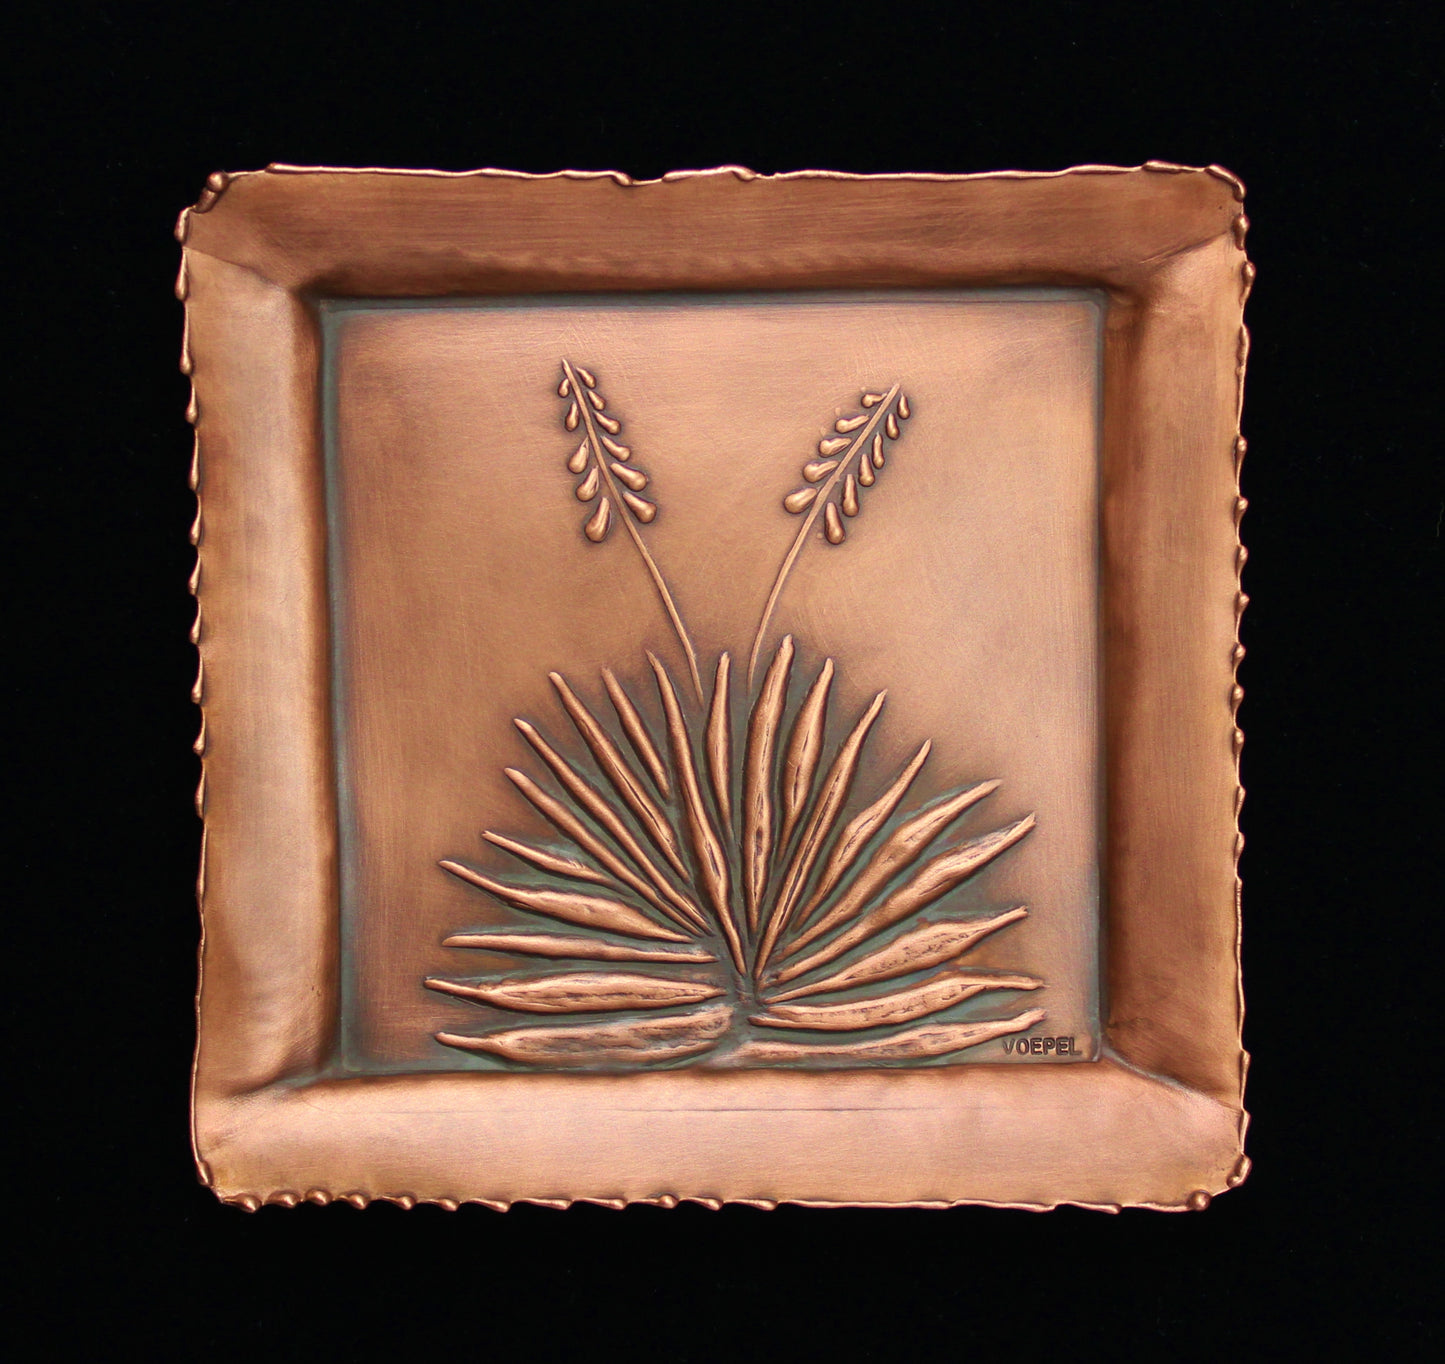 Yucca Copper Art Tile/Tray, 7" x 7"